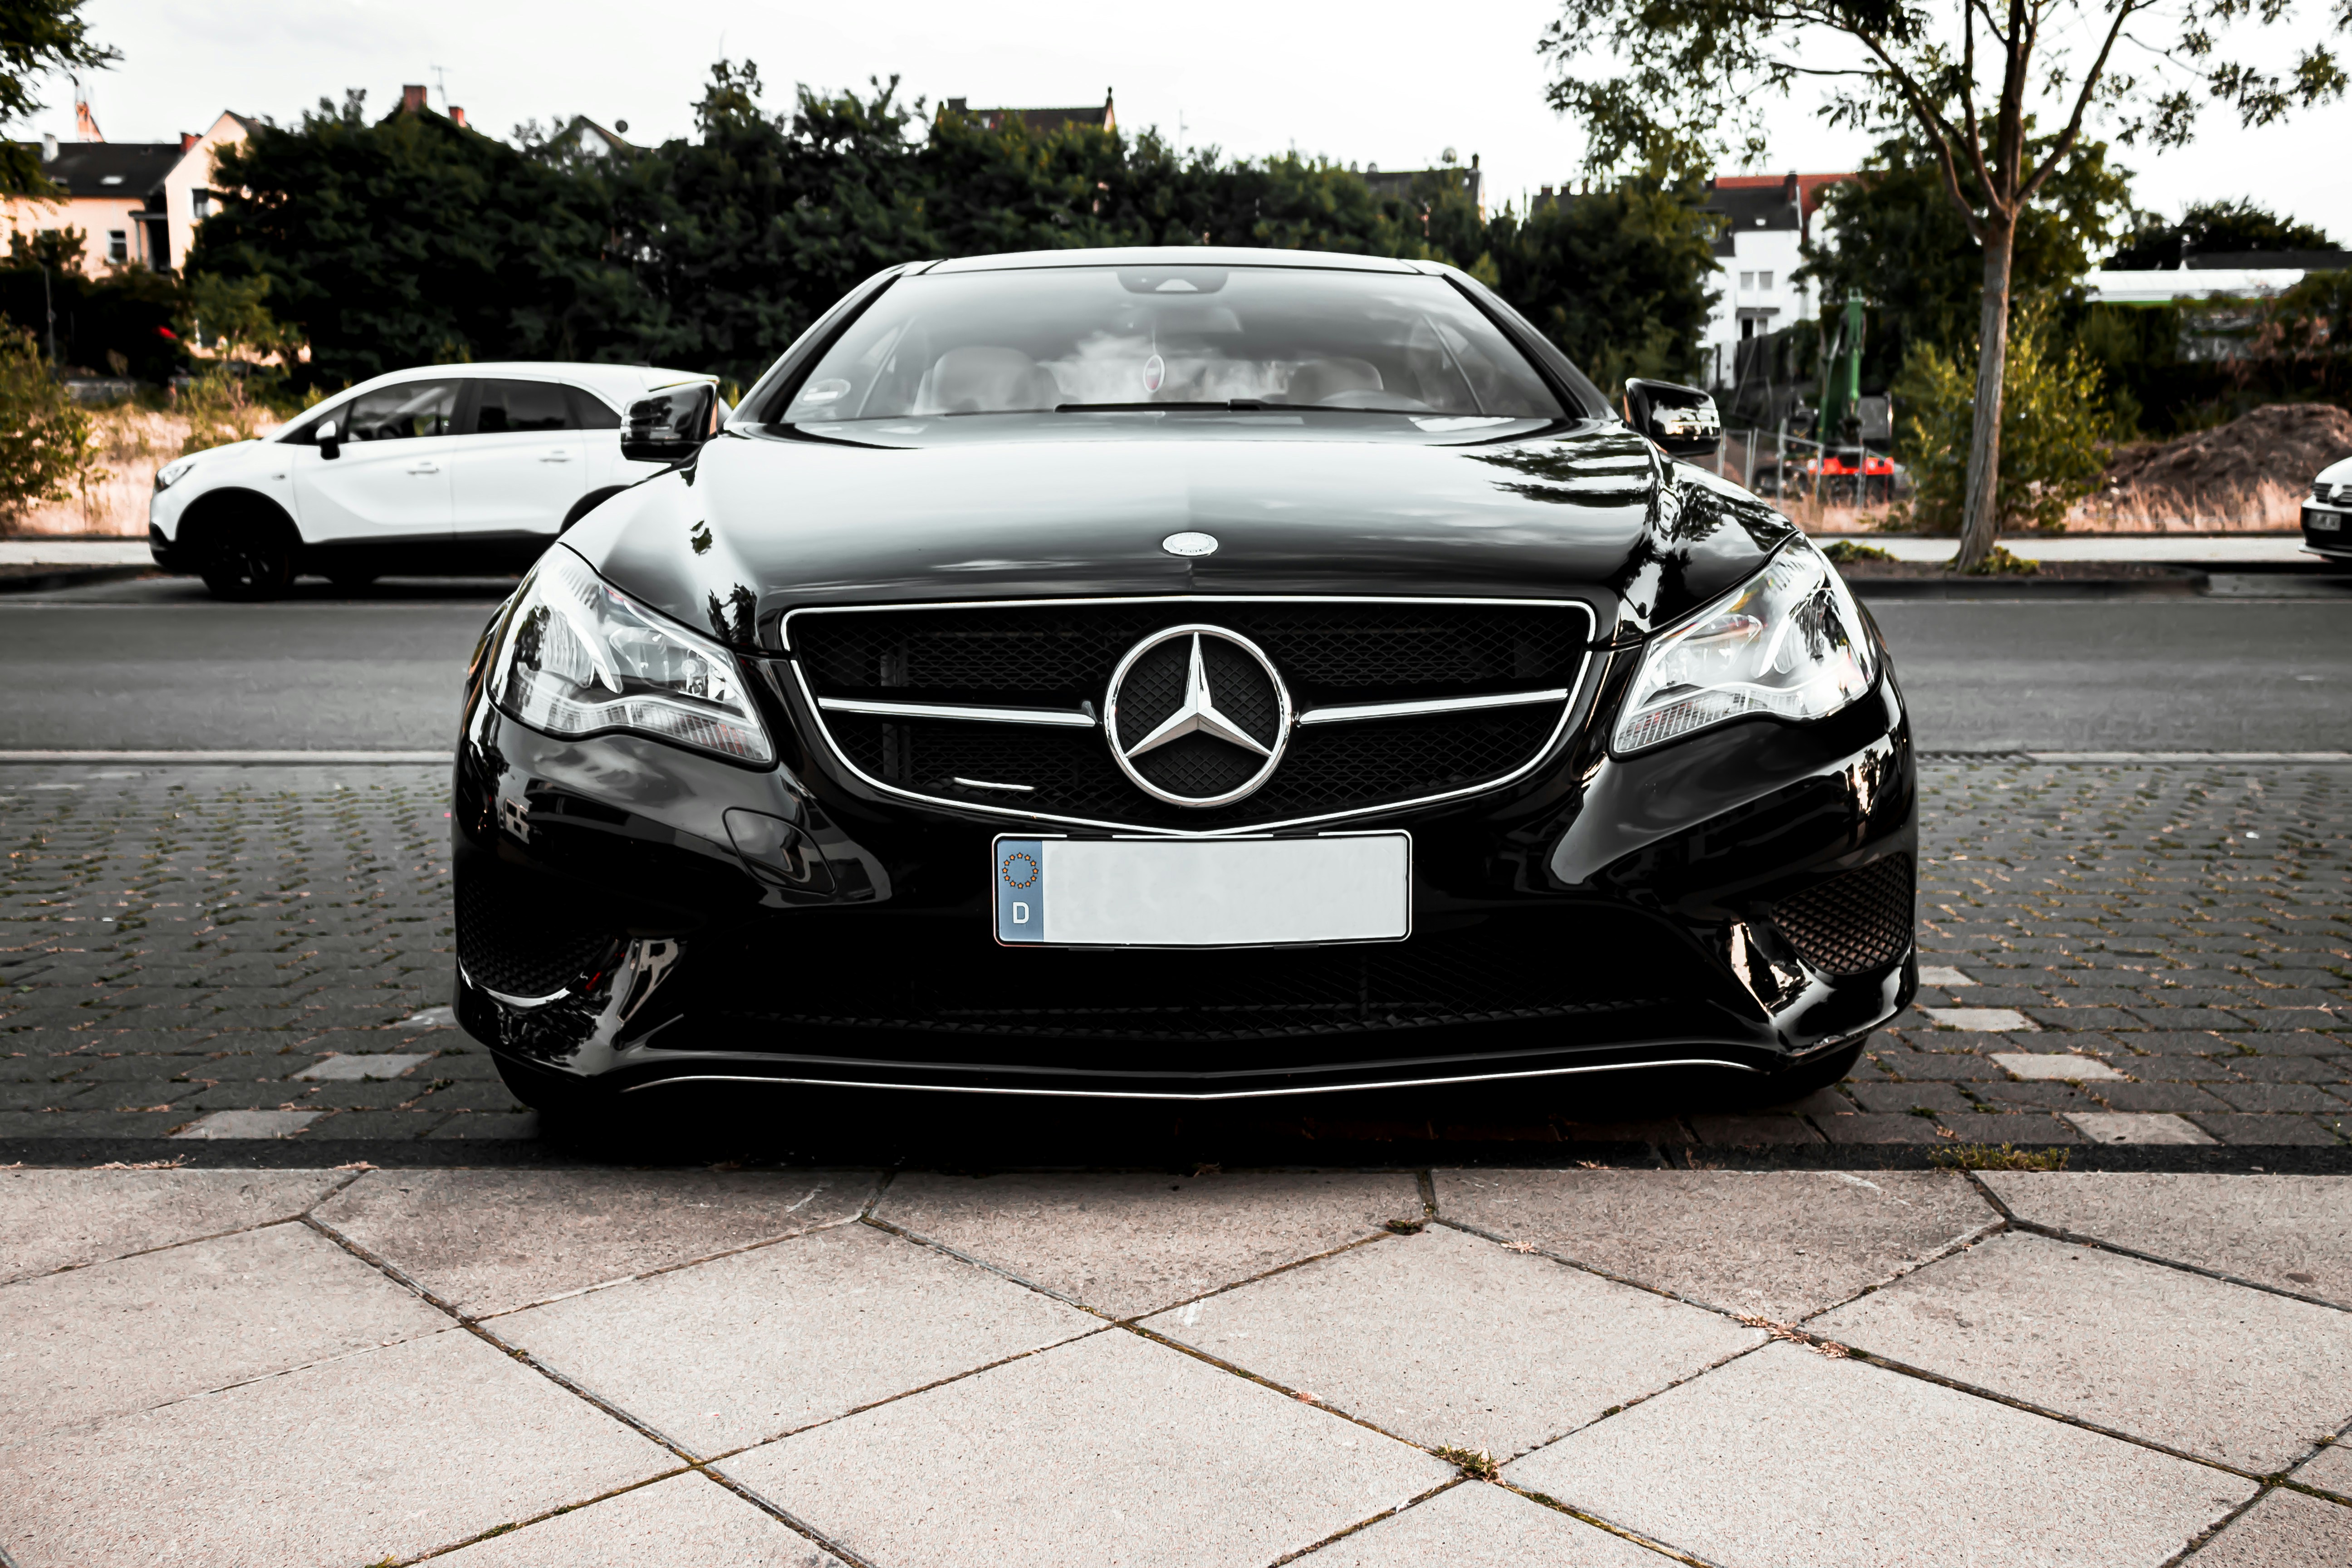 black Mercedes-Benz vehicle parked along side the road